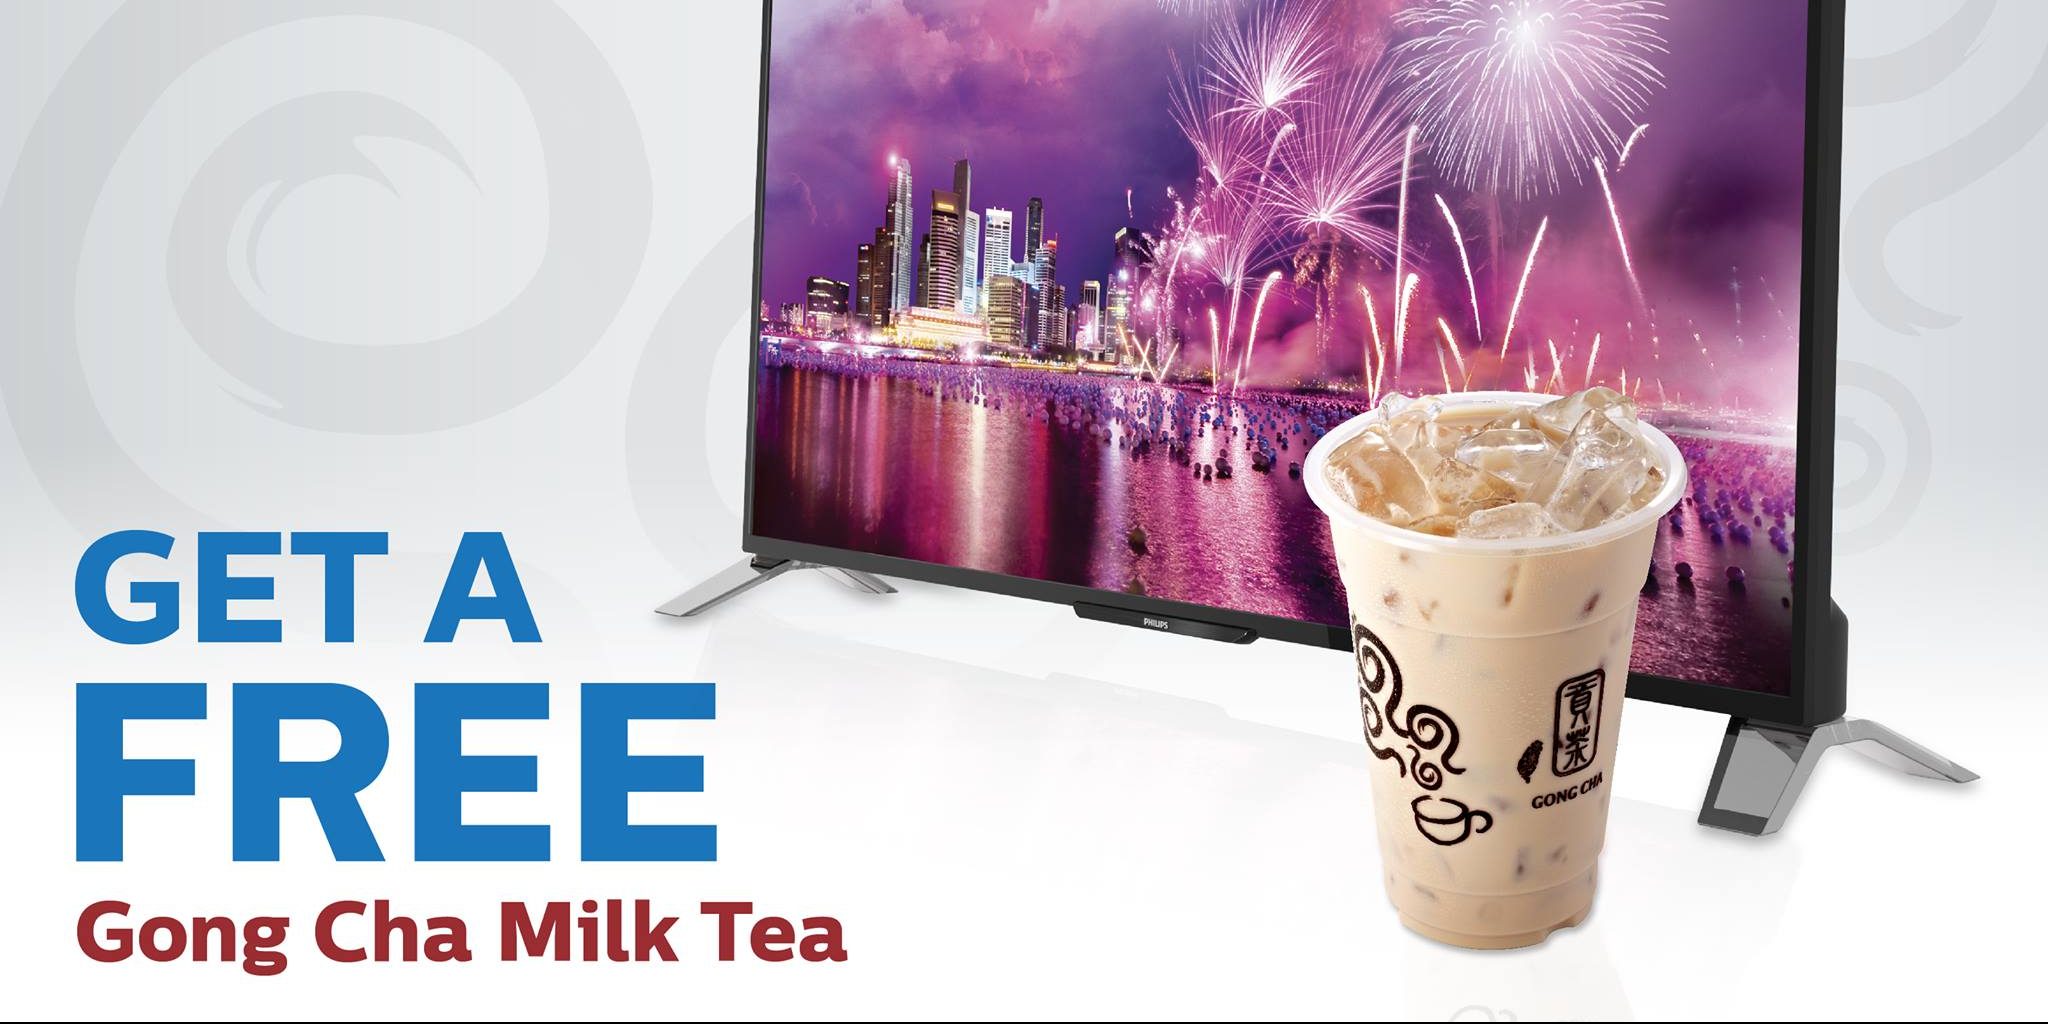 FREE Gong Cha Bubble Milk Tea by Liking Philips TV Singapore Facebook Page Promotion 28 Oct – 6 Nov 2016